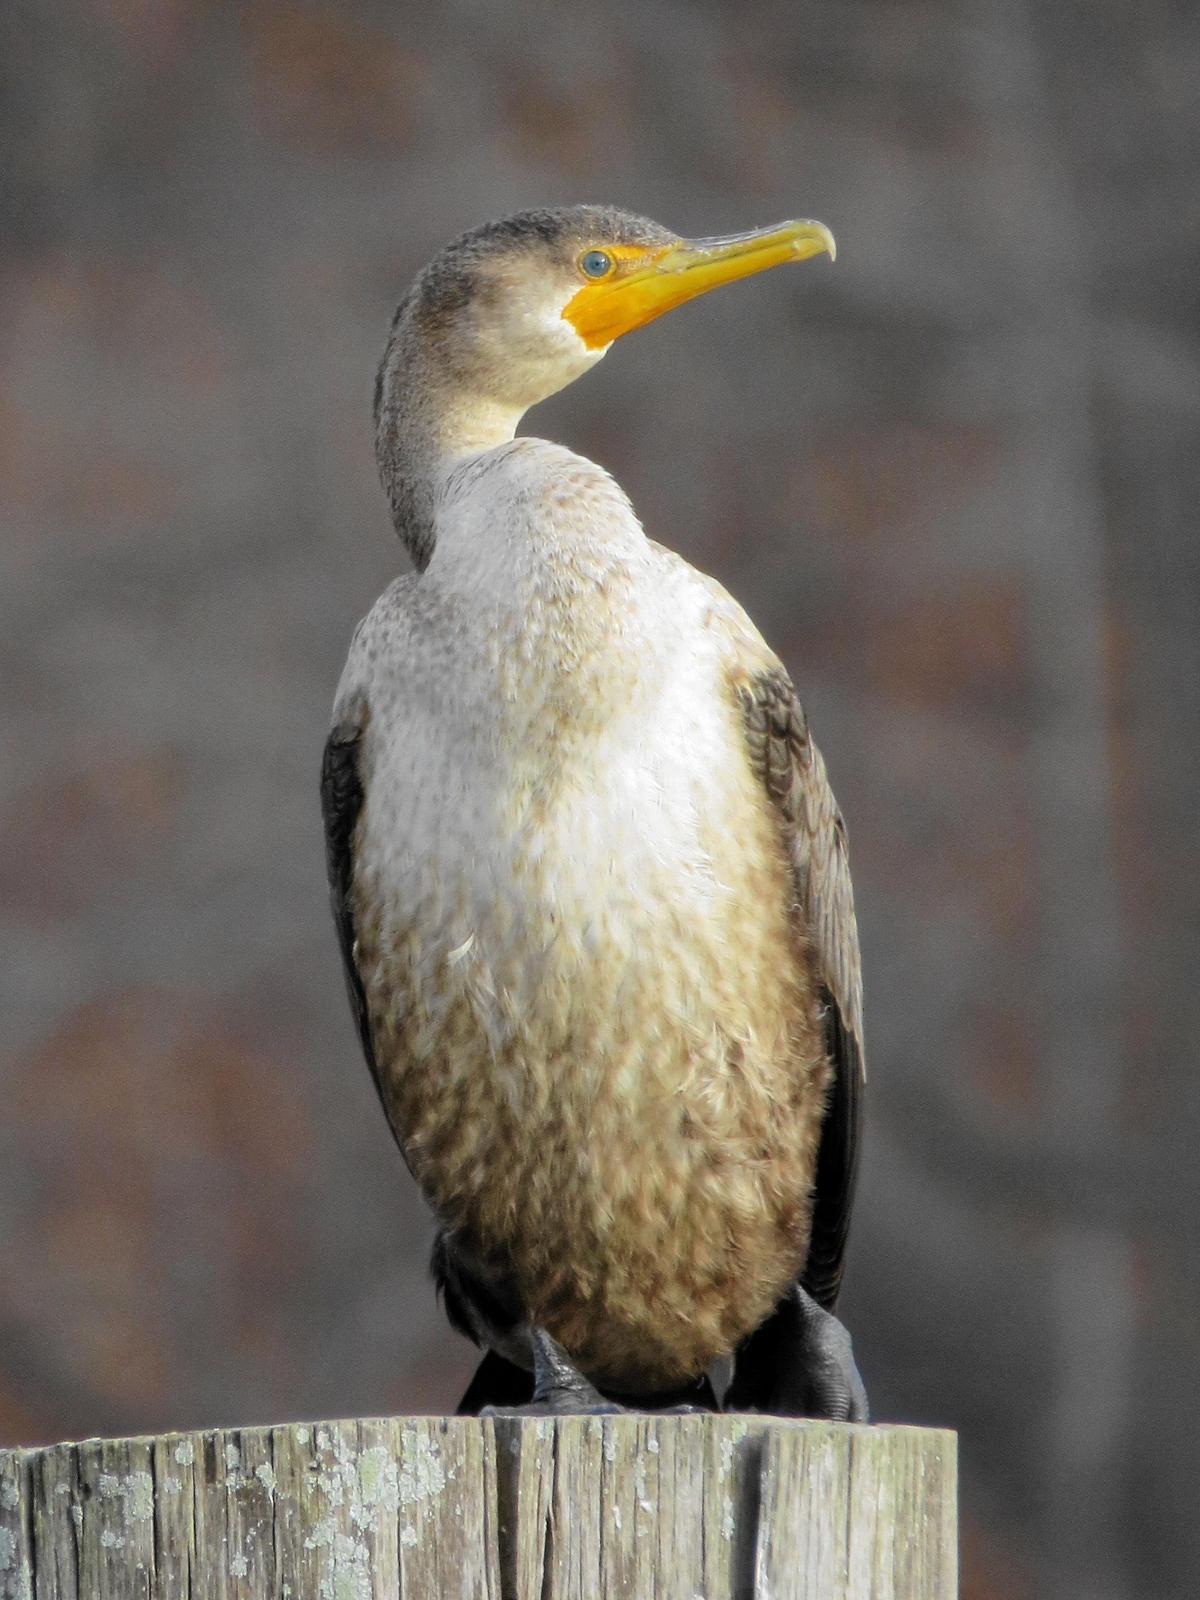 Double-crested Cormorant Photo by Kathy Wooding